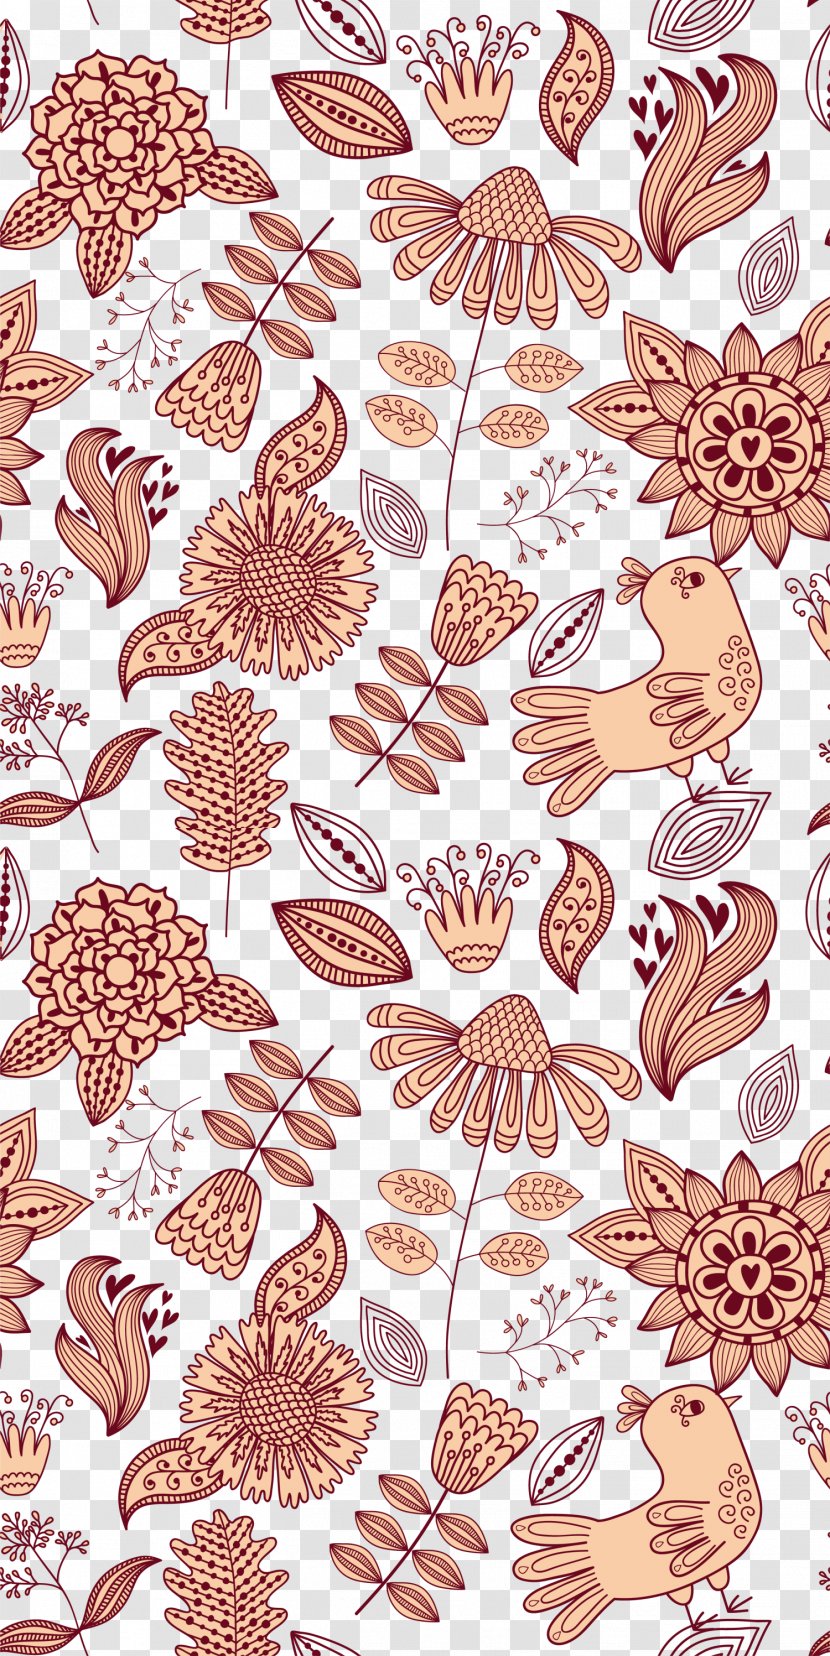 Visual Arts Download - Project - Coffee Flower And Bird Background Transparent PNG